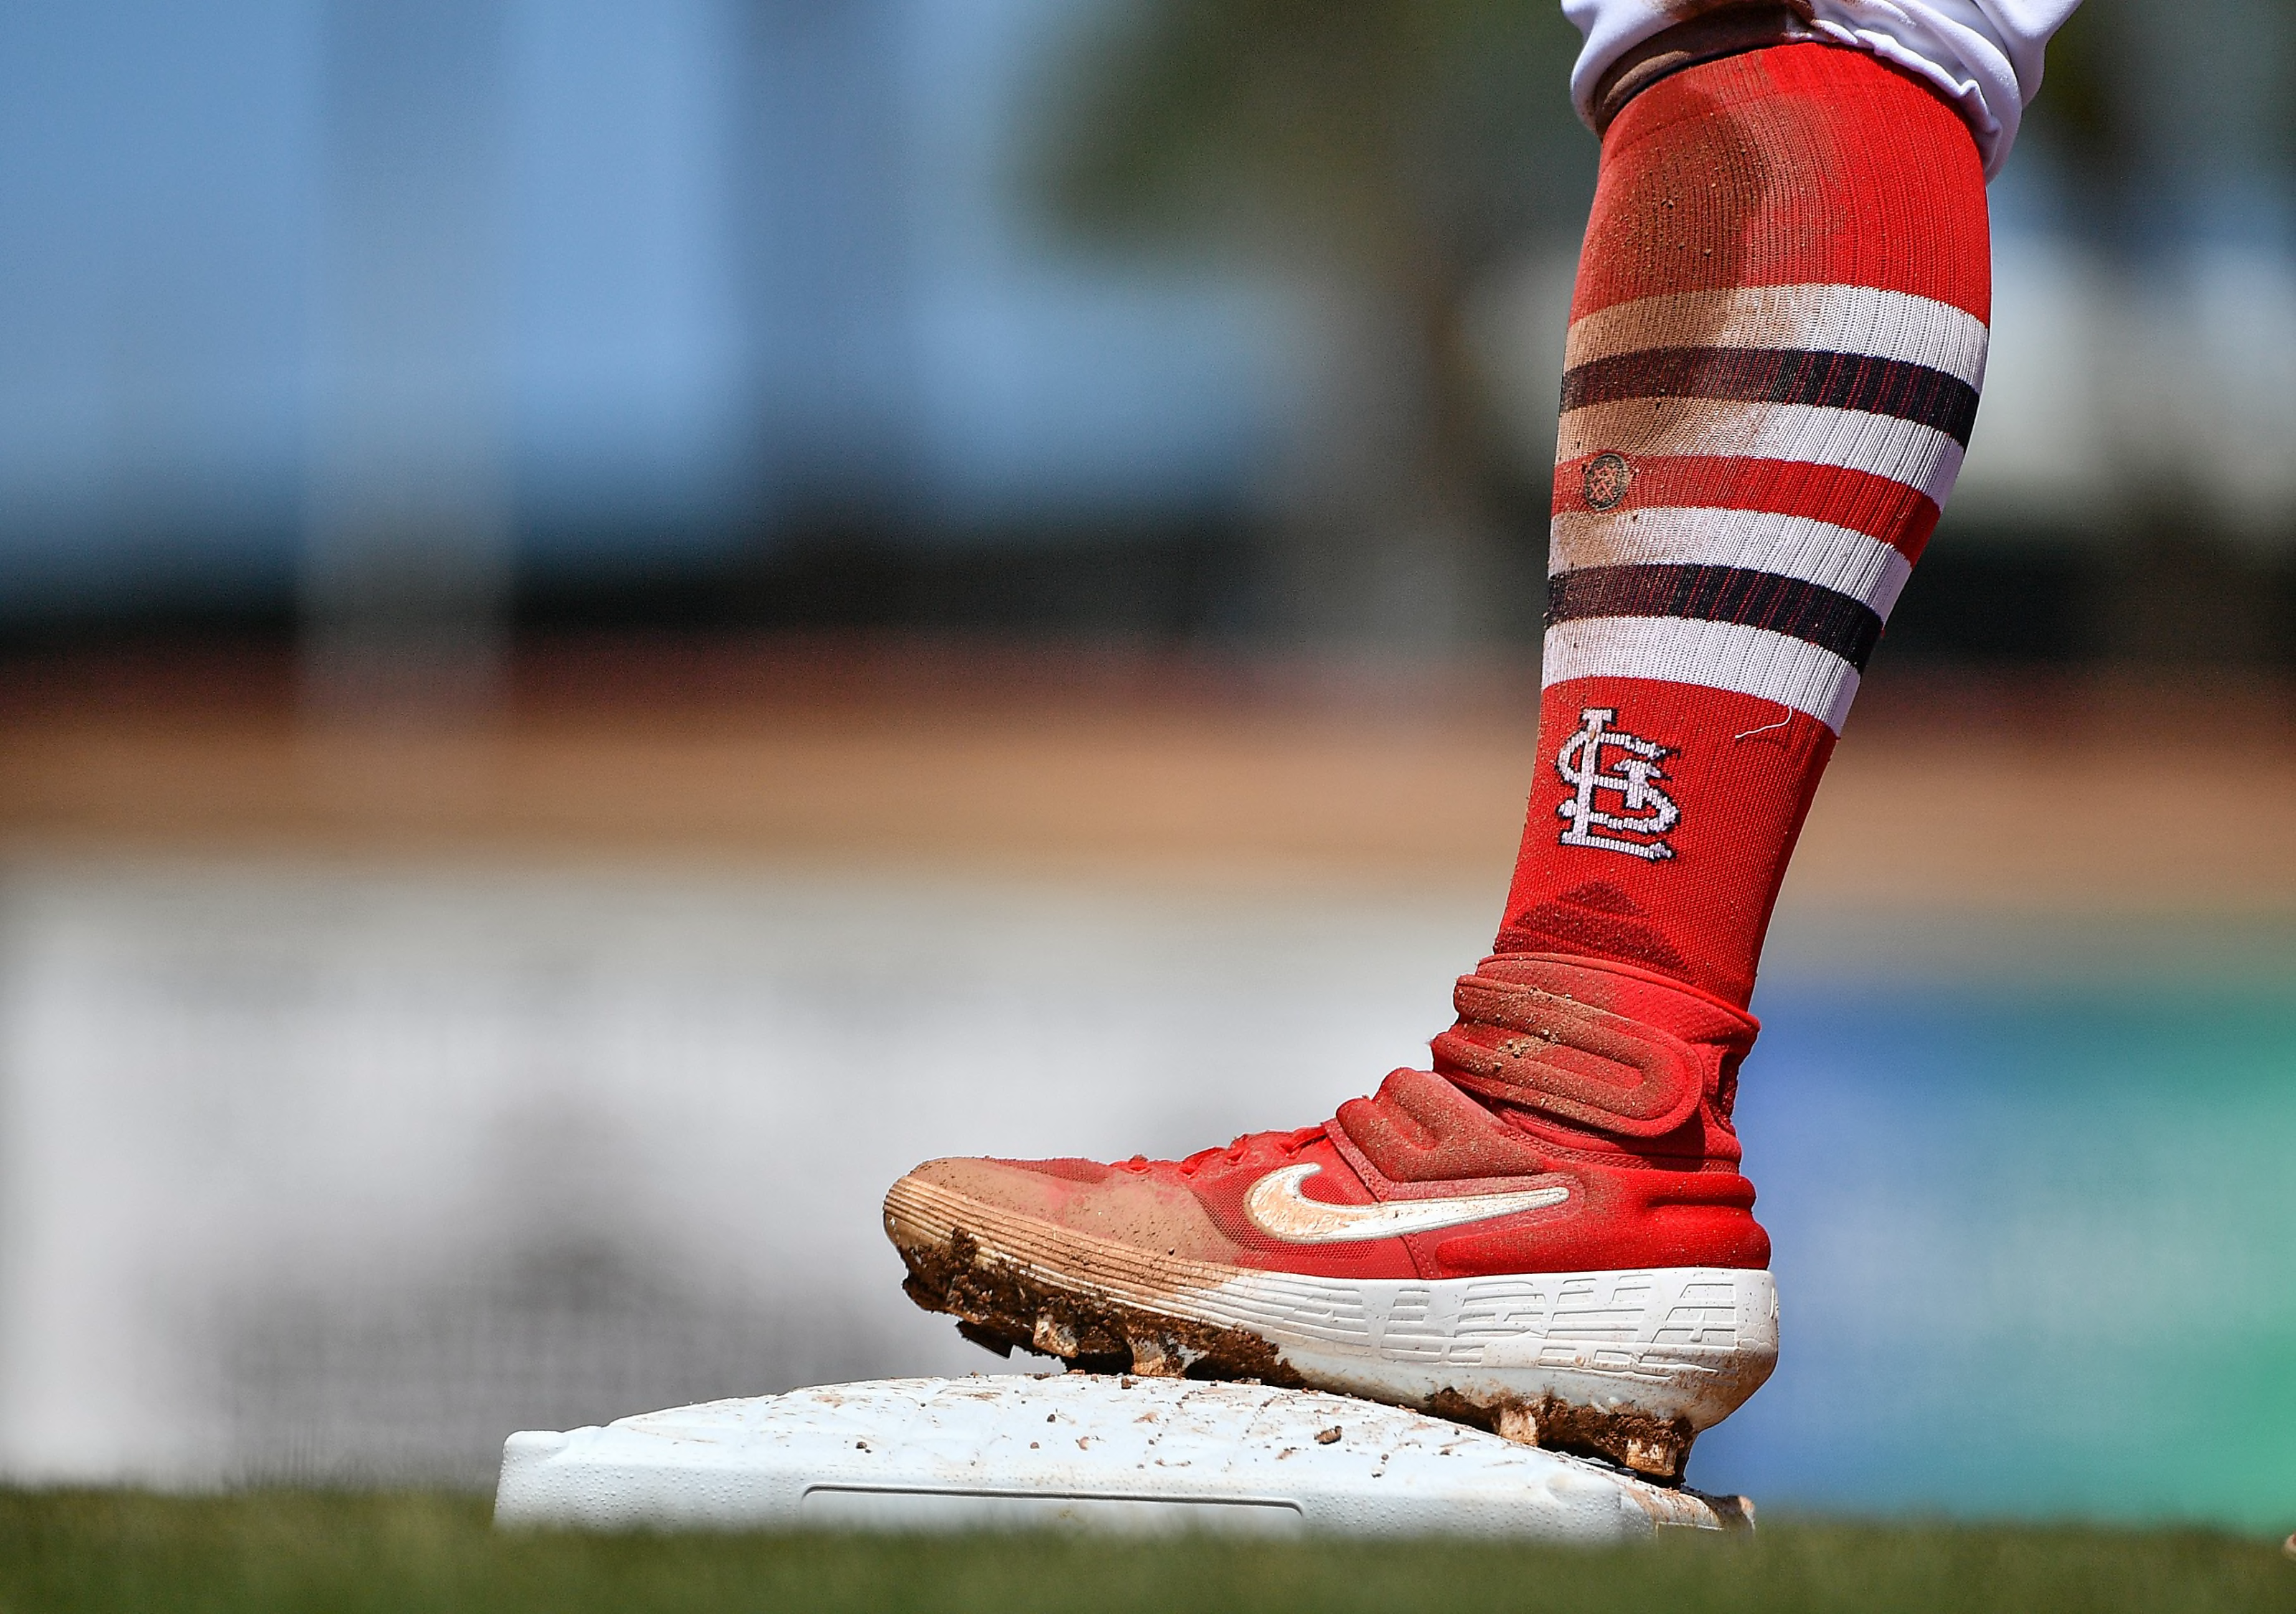 St. Louis Cardinals: Four players likely to be traded in 2020